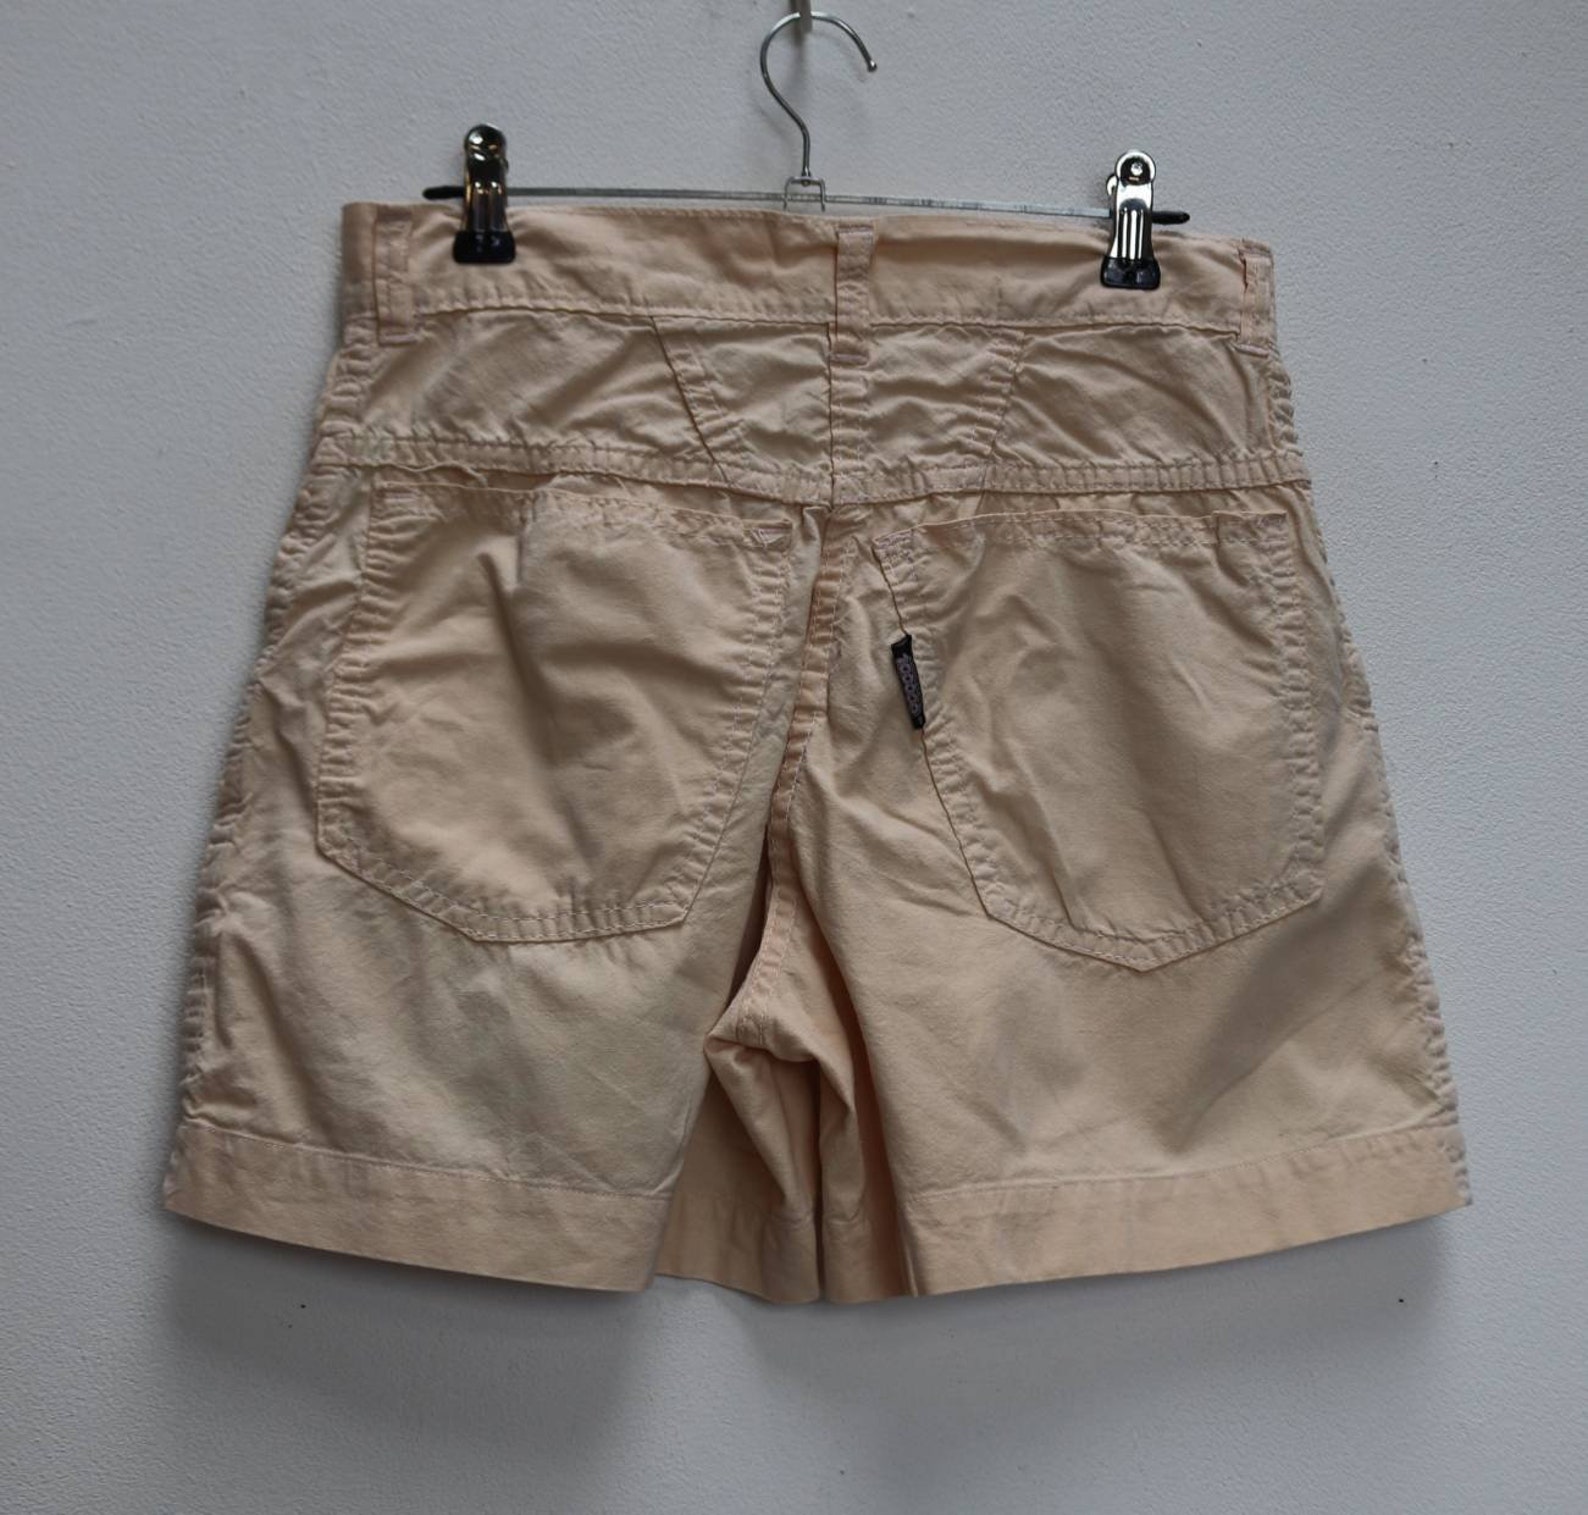 Peach Shorts Vintage High Waisted Shorts Women's Cotton - Etsy